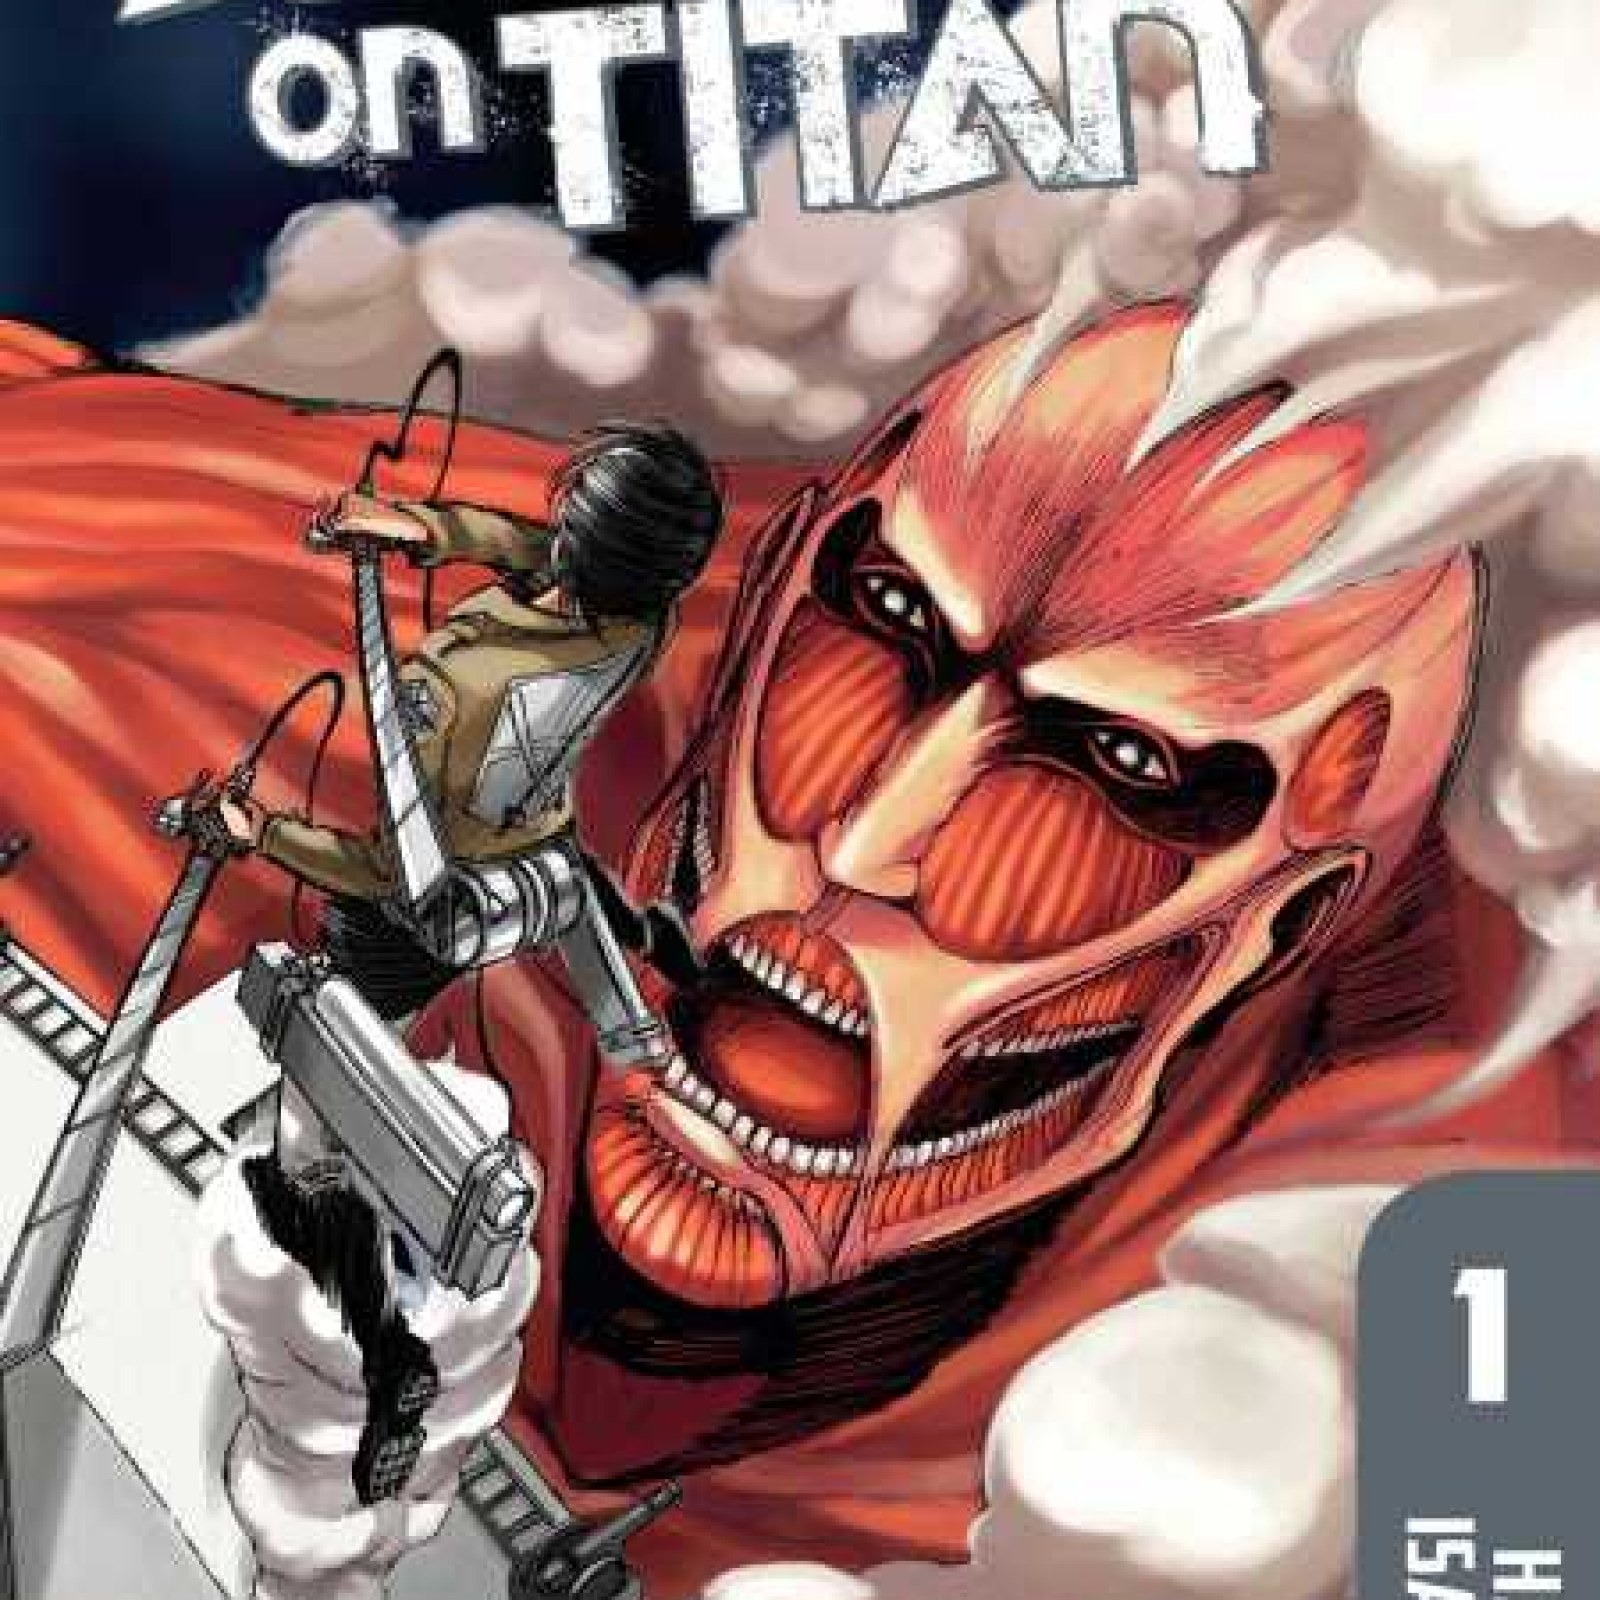 Attack On Titan Manga Set To End In April